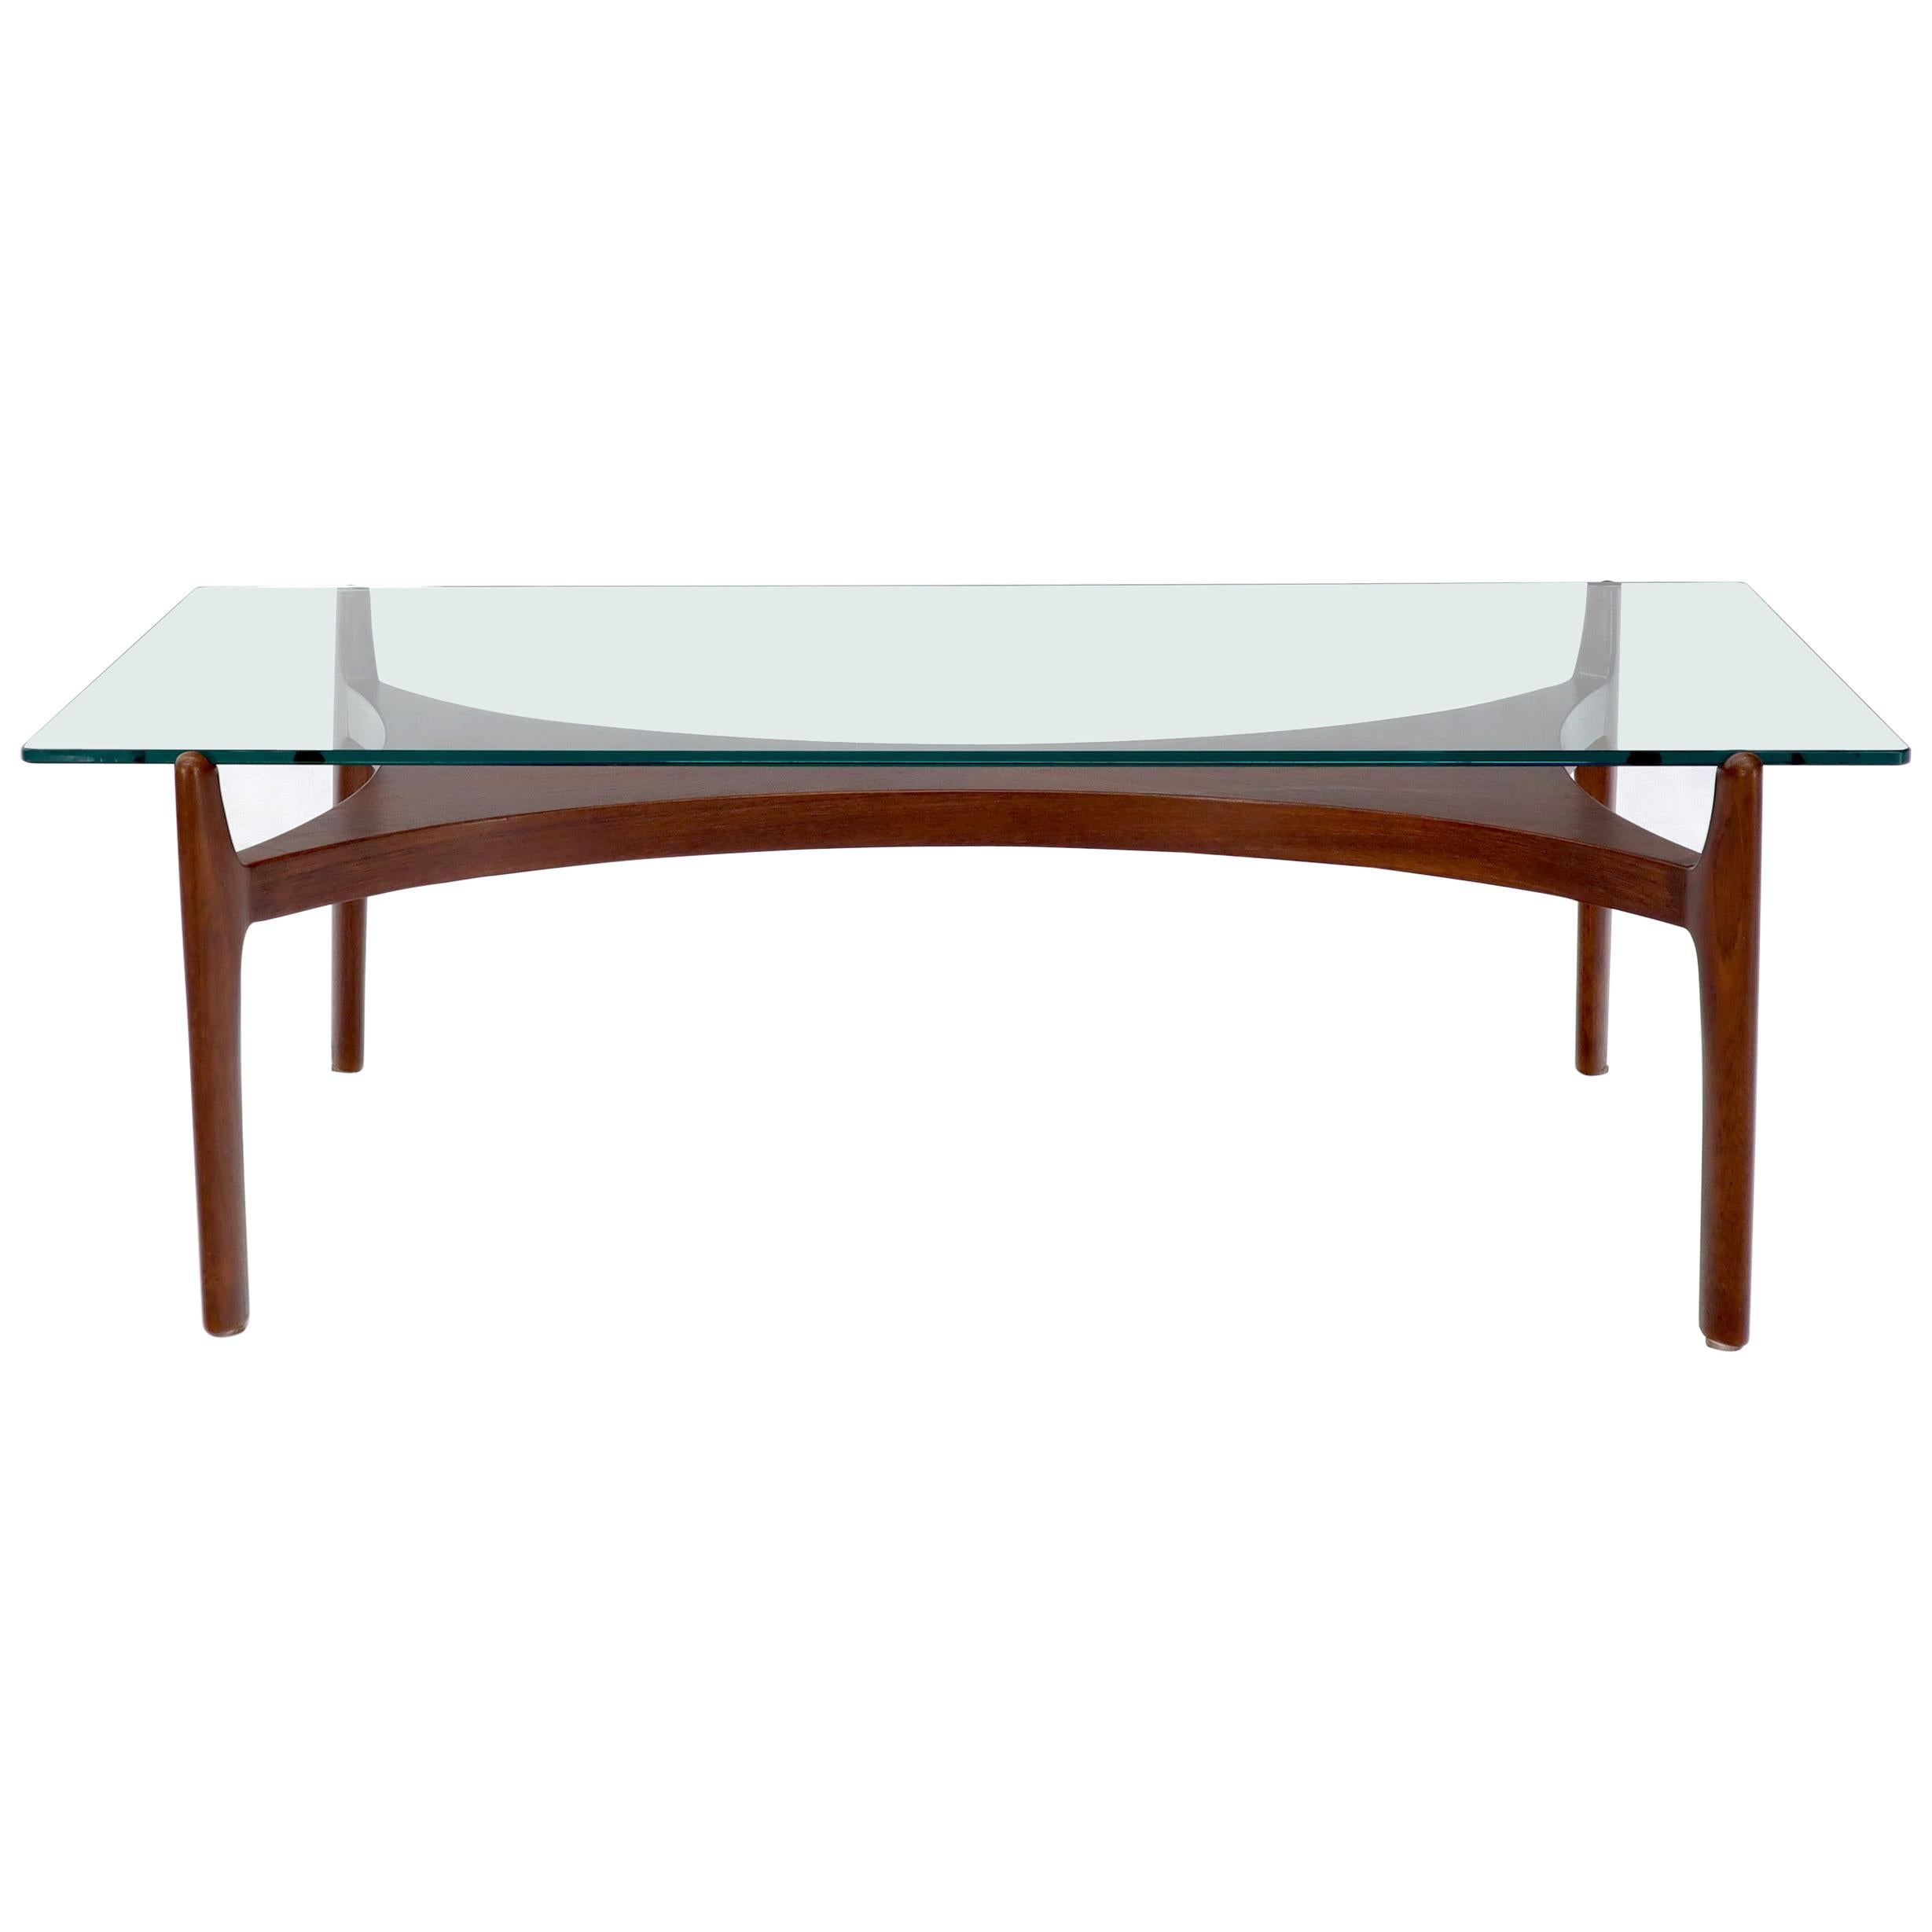 Sculptural Low Profile Teak Base Glass Top Danish Midcentury Coffee Table For Sale